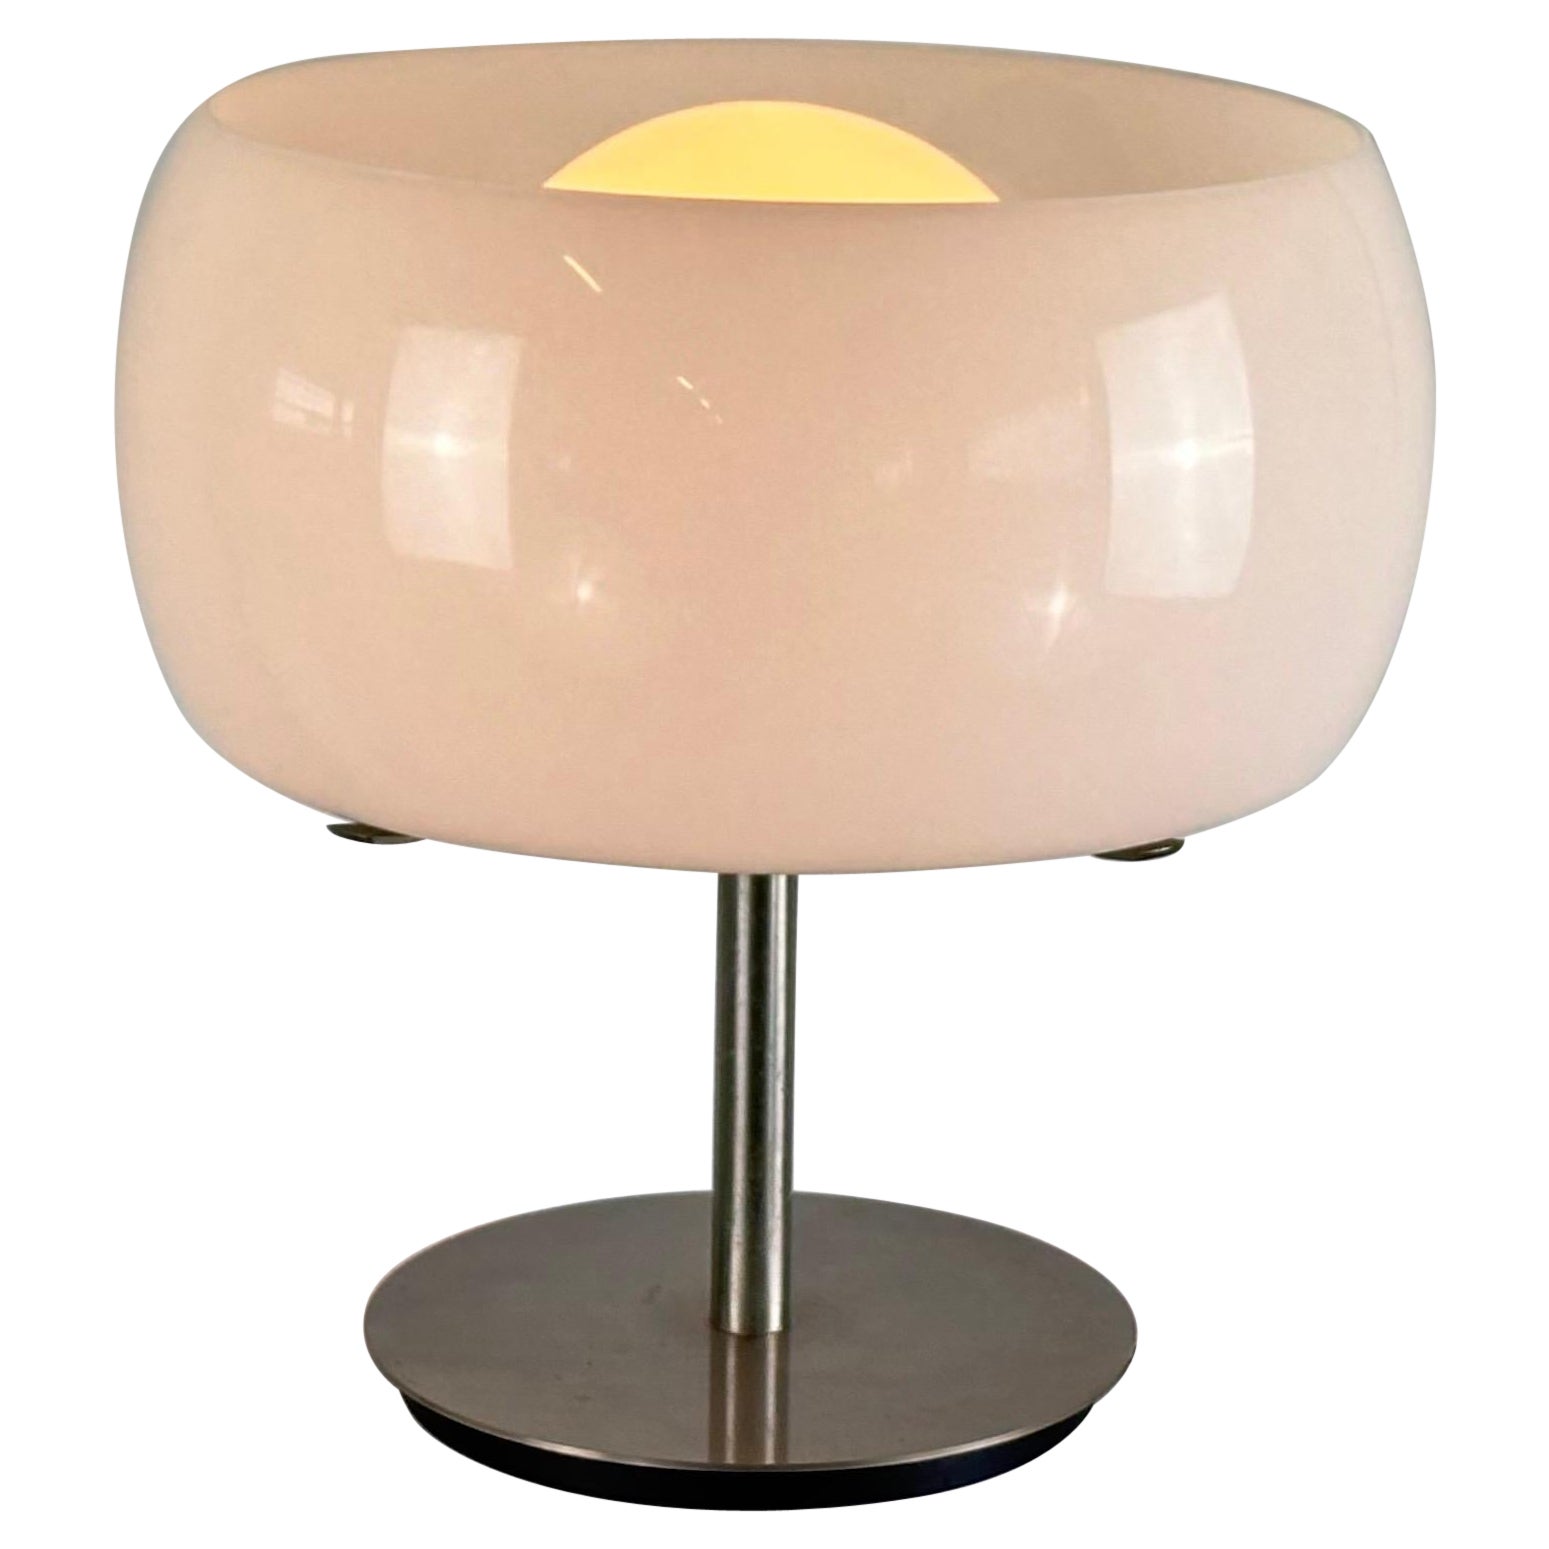 Iconic 'Erse' Table Lamp by Vico Magistretti for Artemide, 1964 - Omega Series